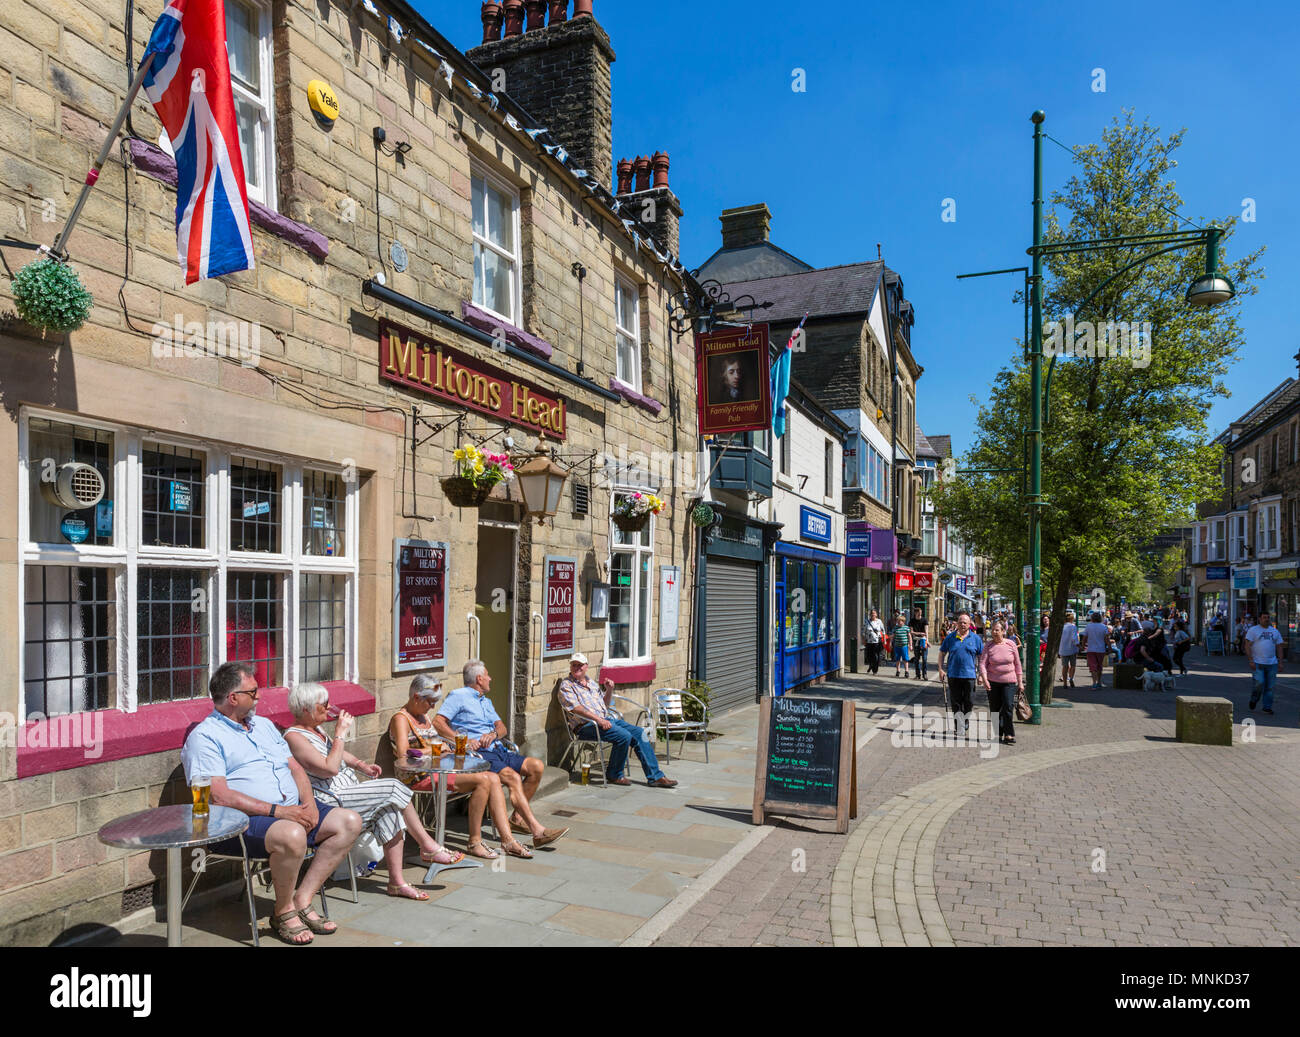 People sitting outside the Miltons Head pub on Spring Gardens in the town centre, Buxton, Derbyshire, England, UK Stock Photo